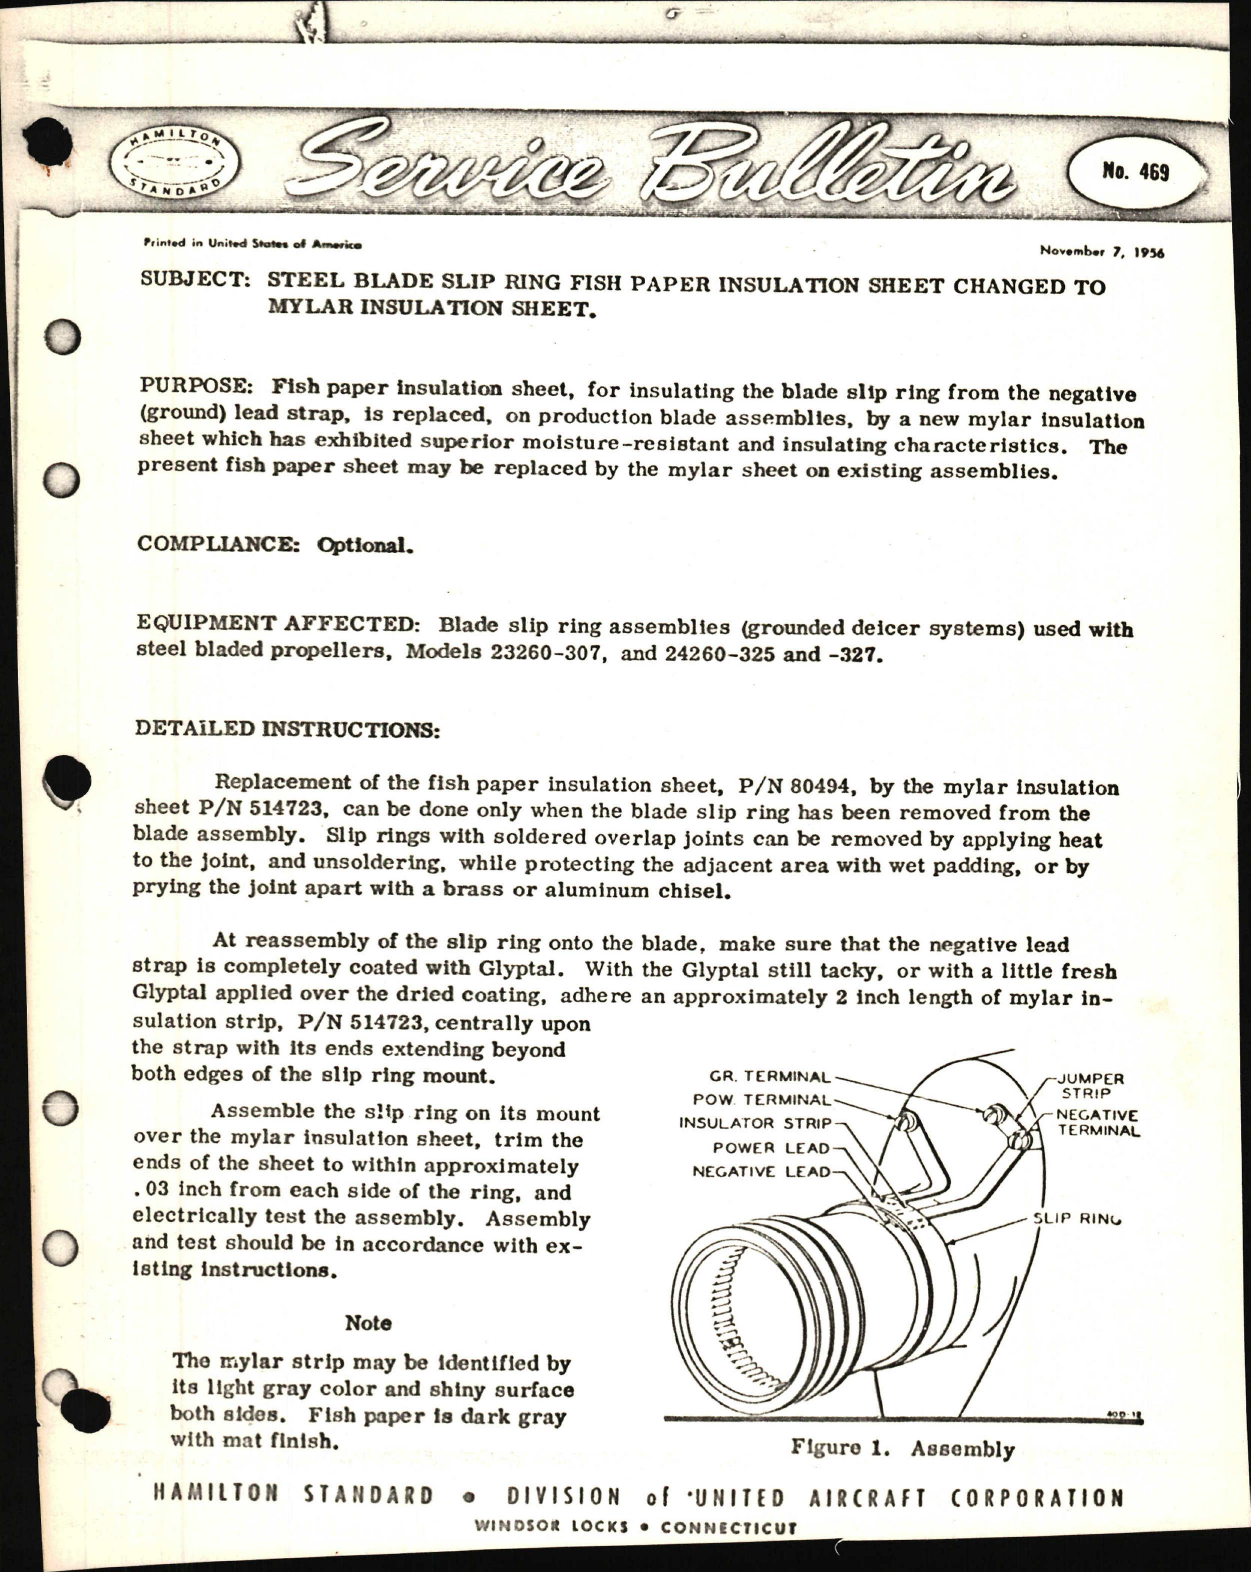 Sample page 1 from AirCorps Library document: Steel Blade Slip Ring Fish Paper Insulation Sheet Changed to Mylar Insulation Sheet